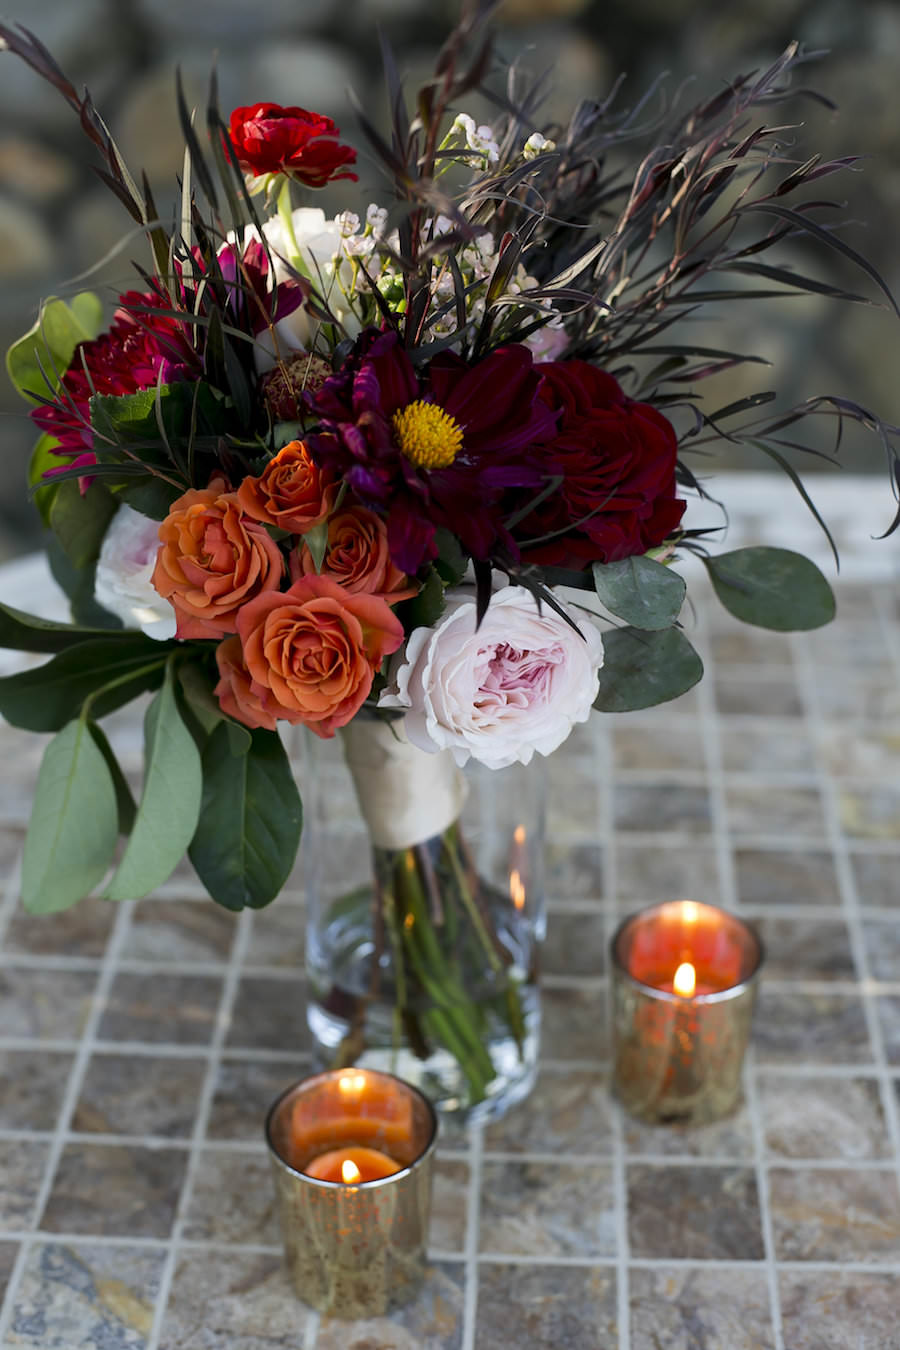 Burgundy and Orange Fall Themed Wedding Decor Bouquet with Dahlias, Sunflowers and Roses